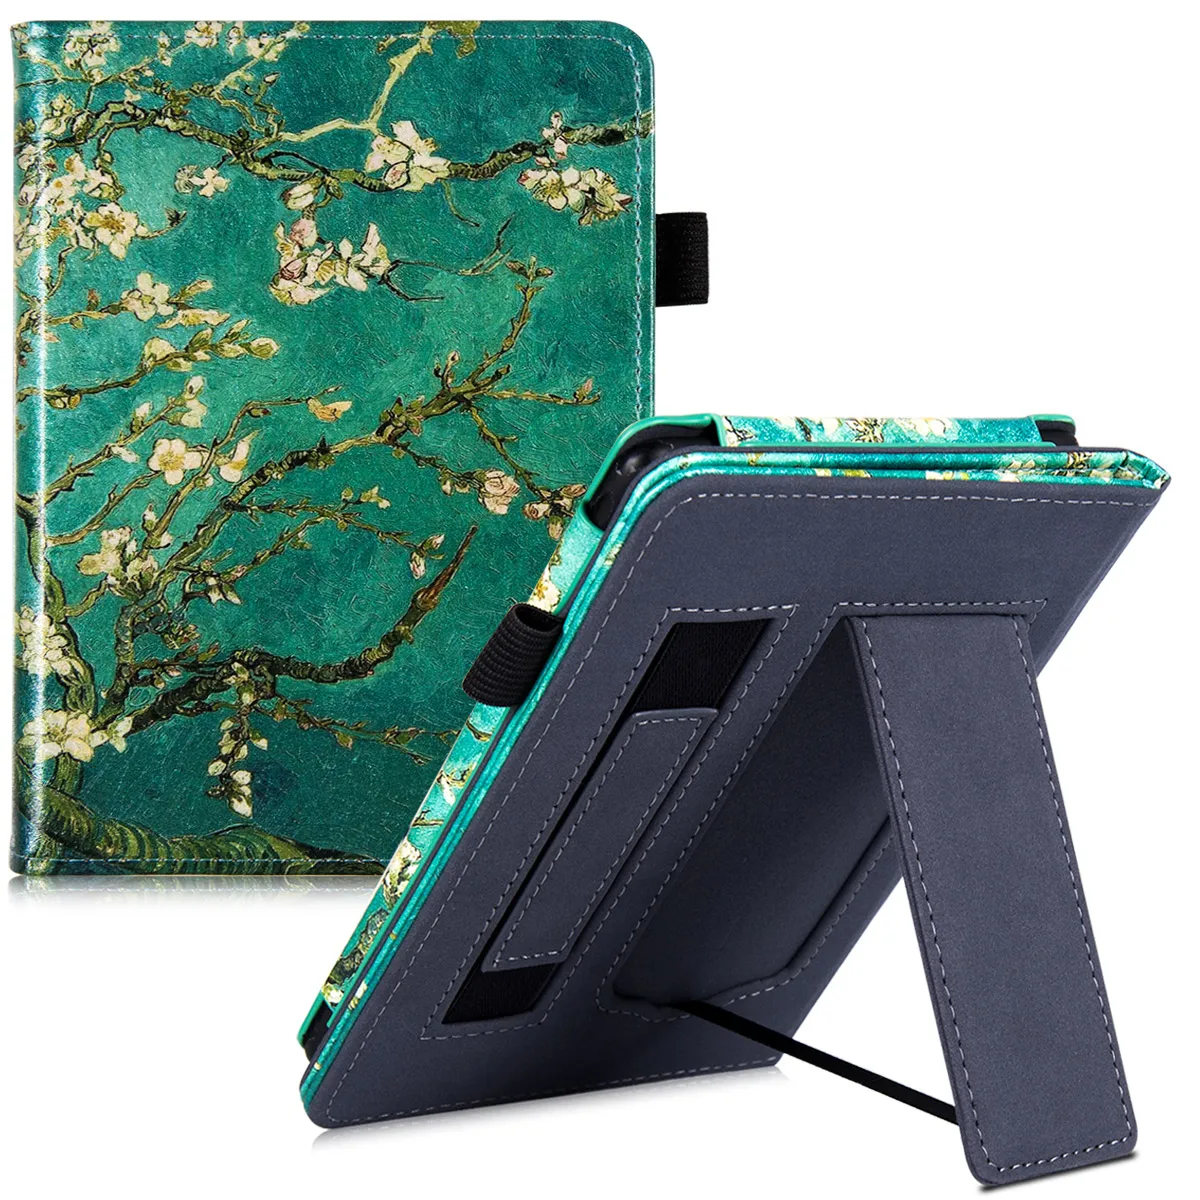 

Kindle Paperwhite 7th Generation Case with Stand/Hand Strap - PU Leather Cover for Kindle Paperwhite 6th Generation eReader